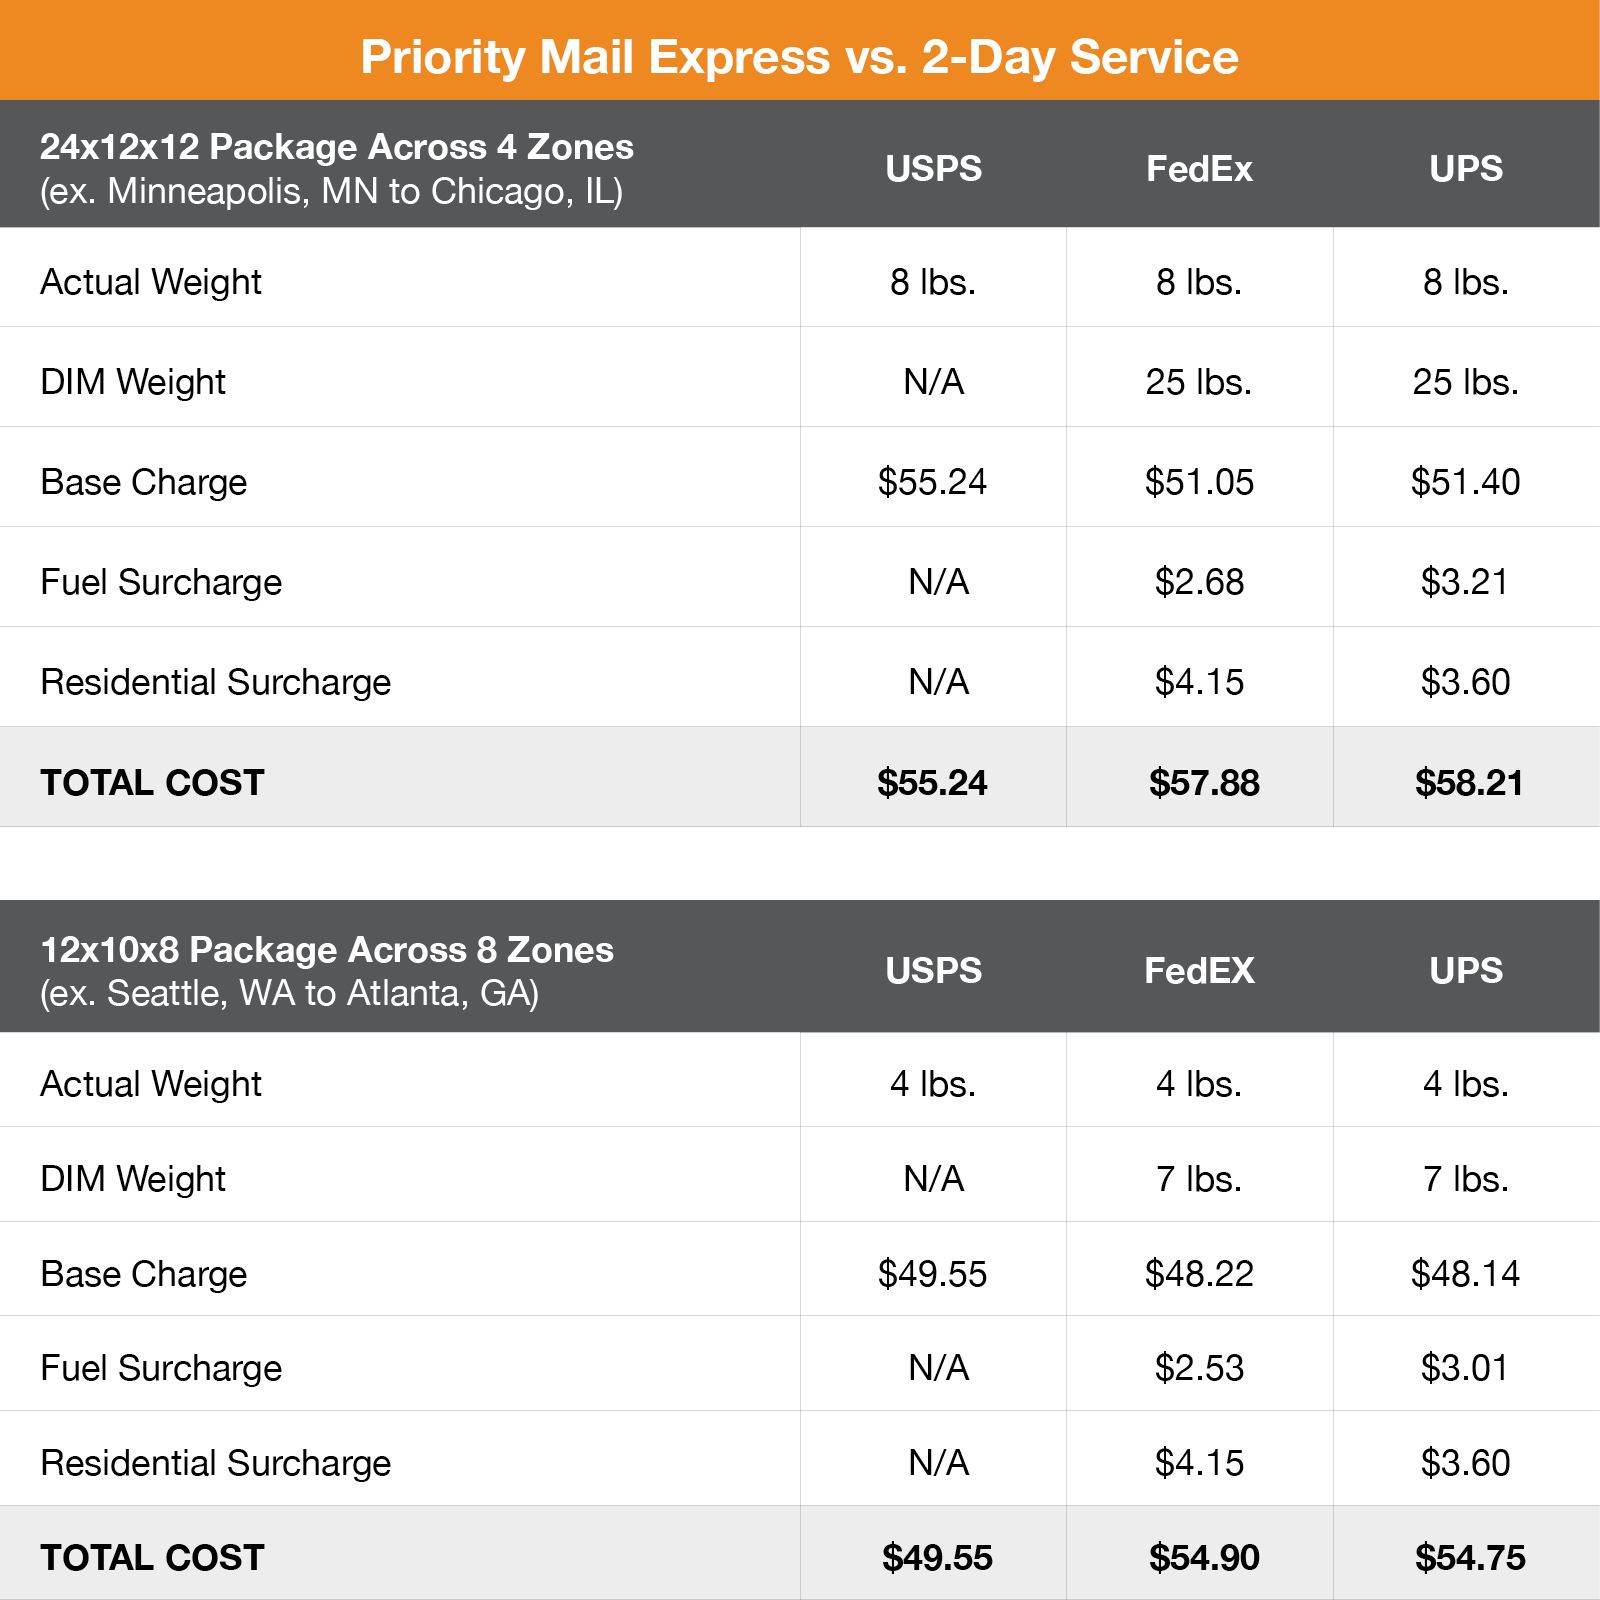 Chart comparing USPS Priority Mail Express with UPS and FedEx 2-Day Service